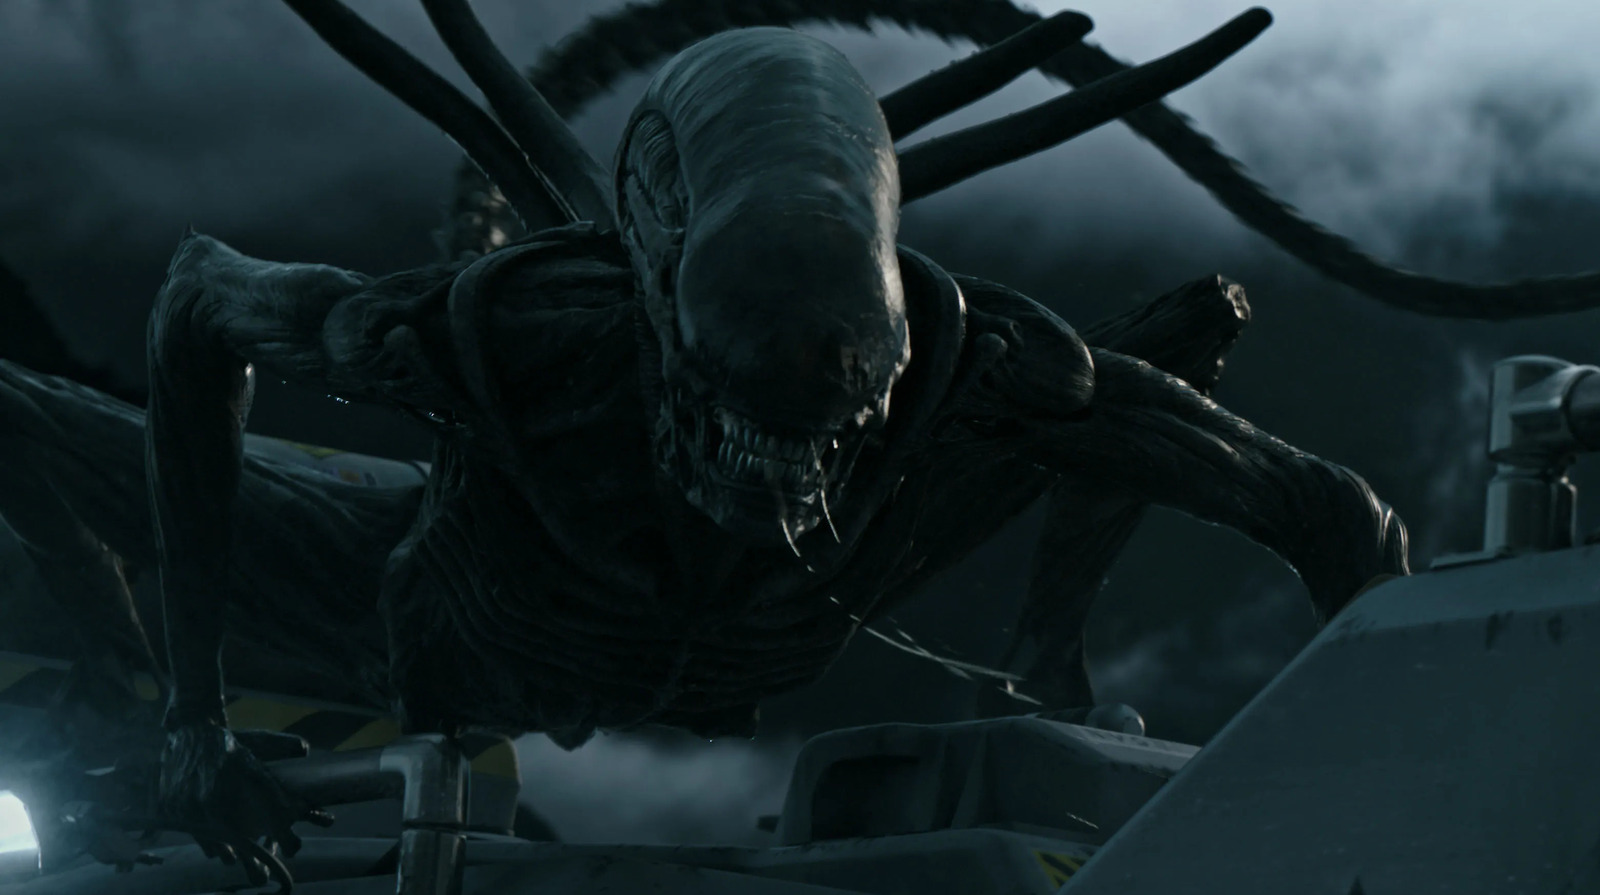 Why Xenomorphs Are Obsessed With Killing Humans